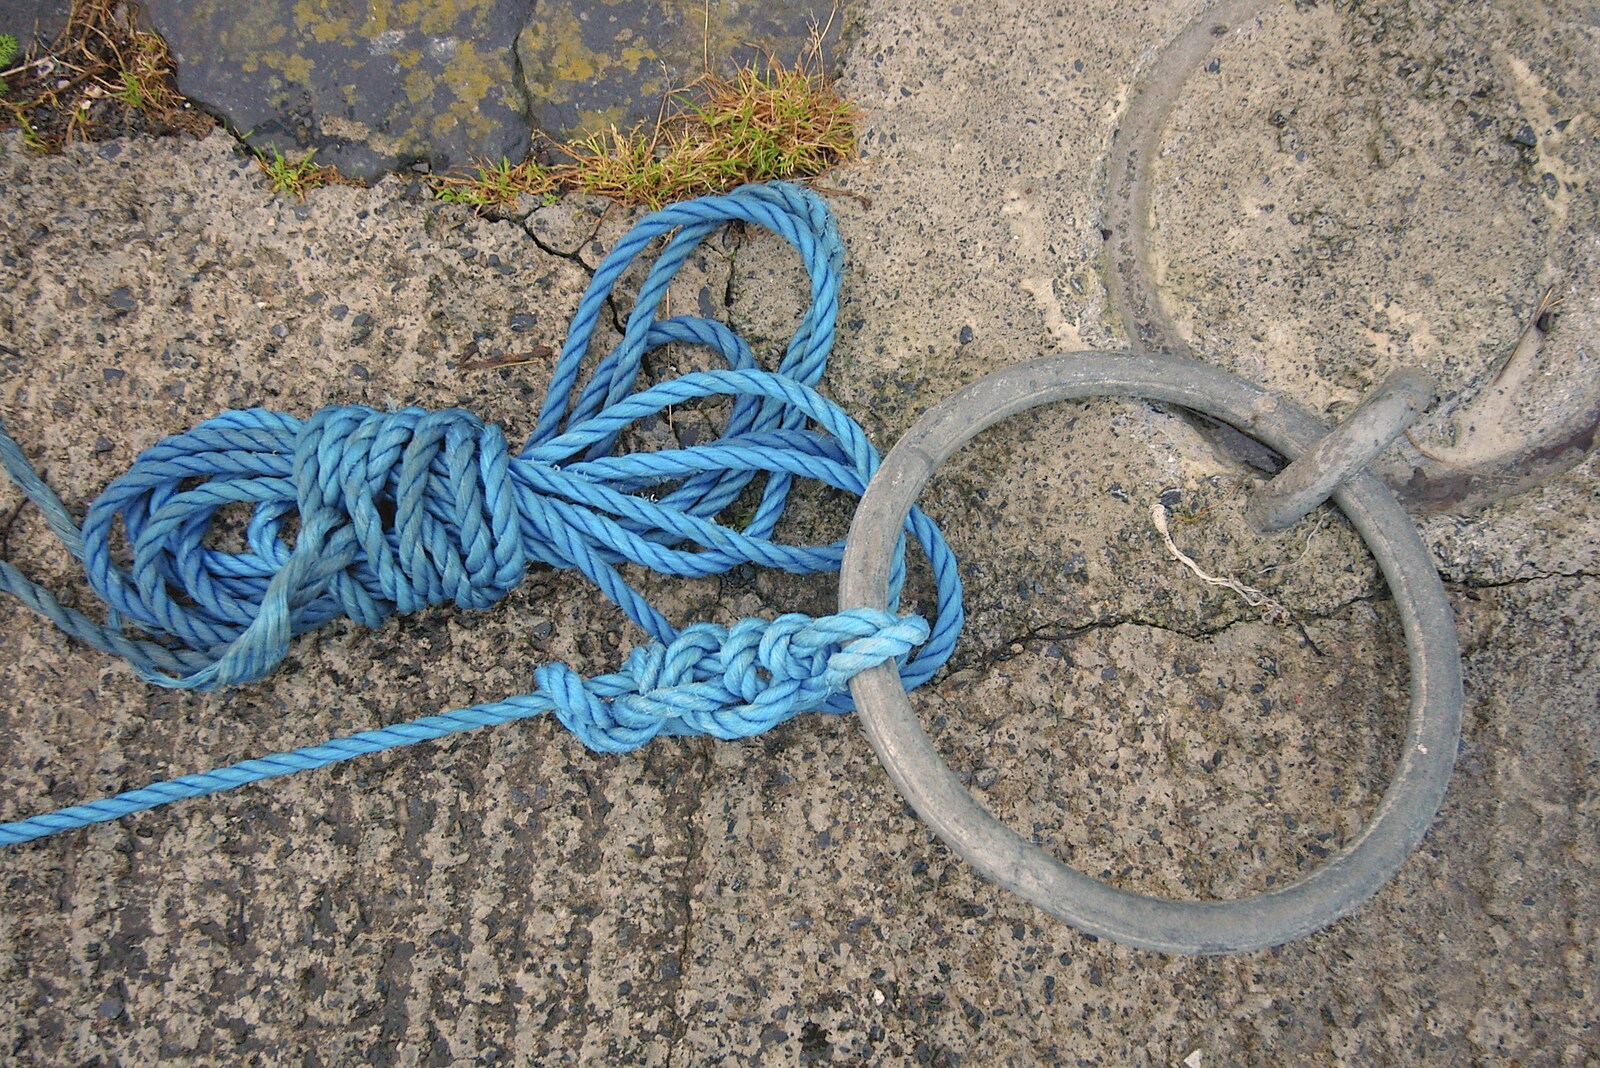 A tangle of rope from Corofin, Ennistymon and The Burran, County Clare, Western Ireland - 27th October 2006